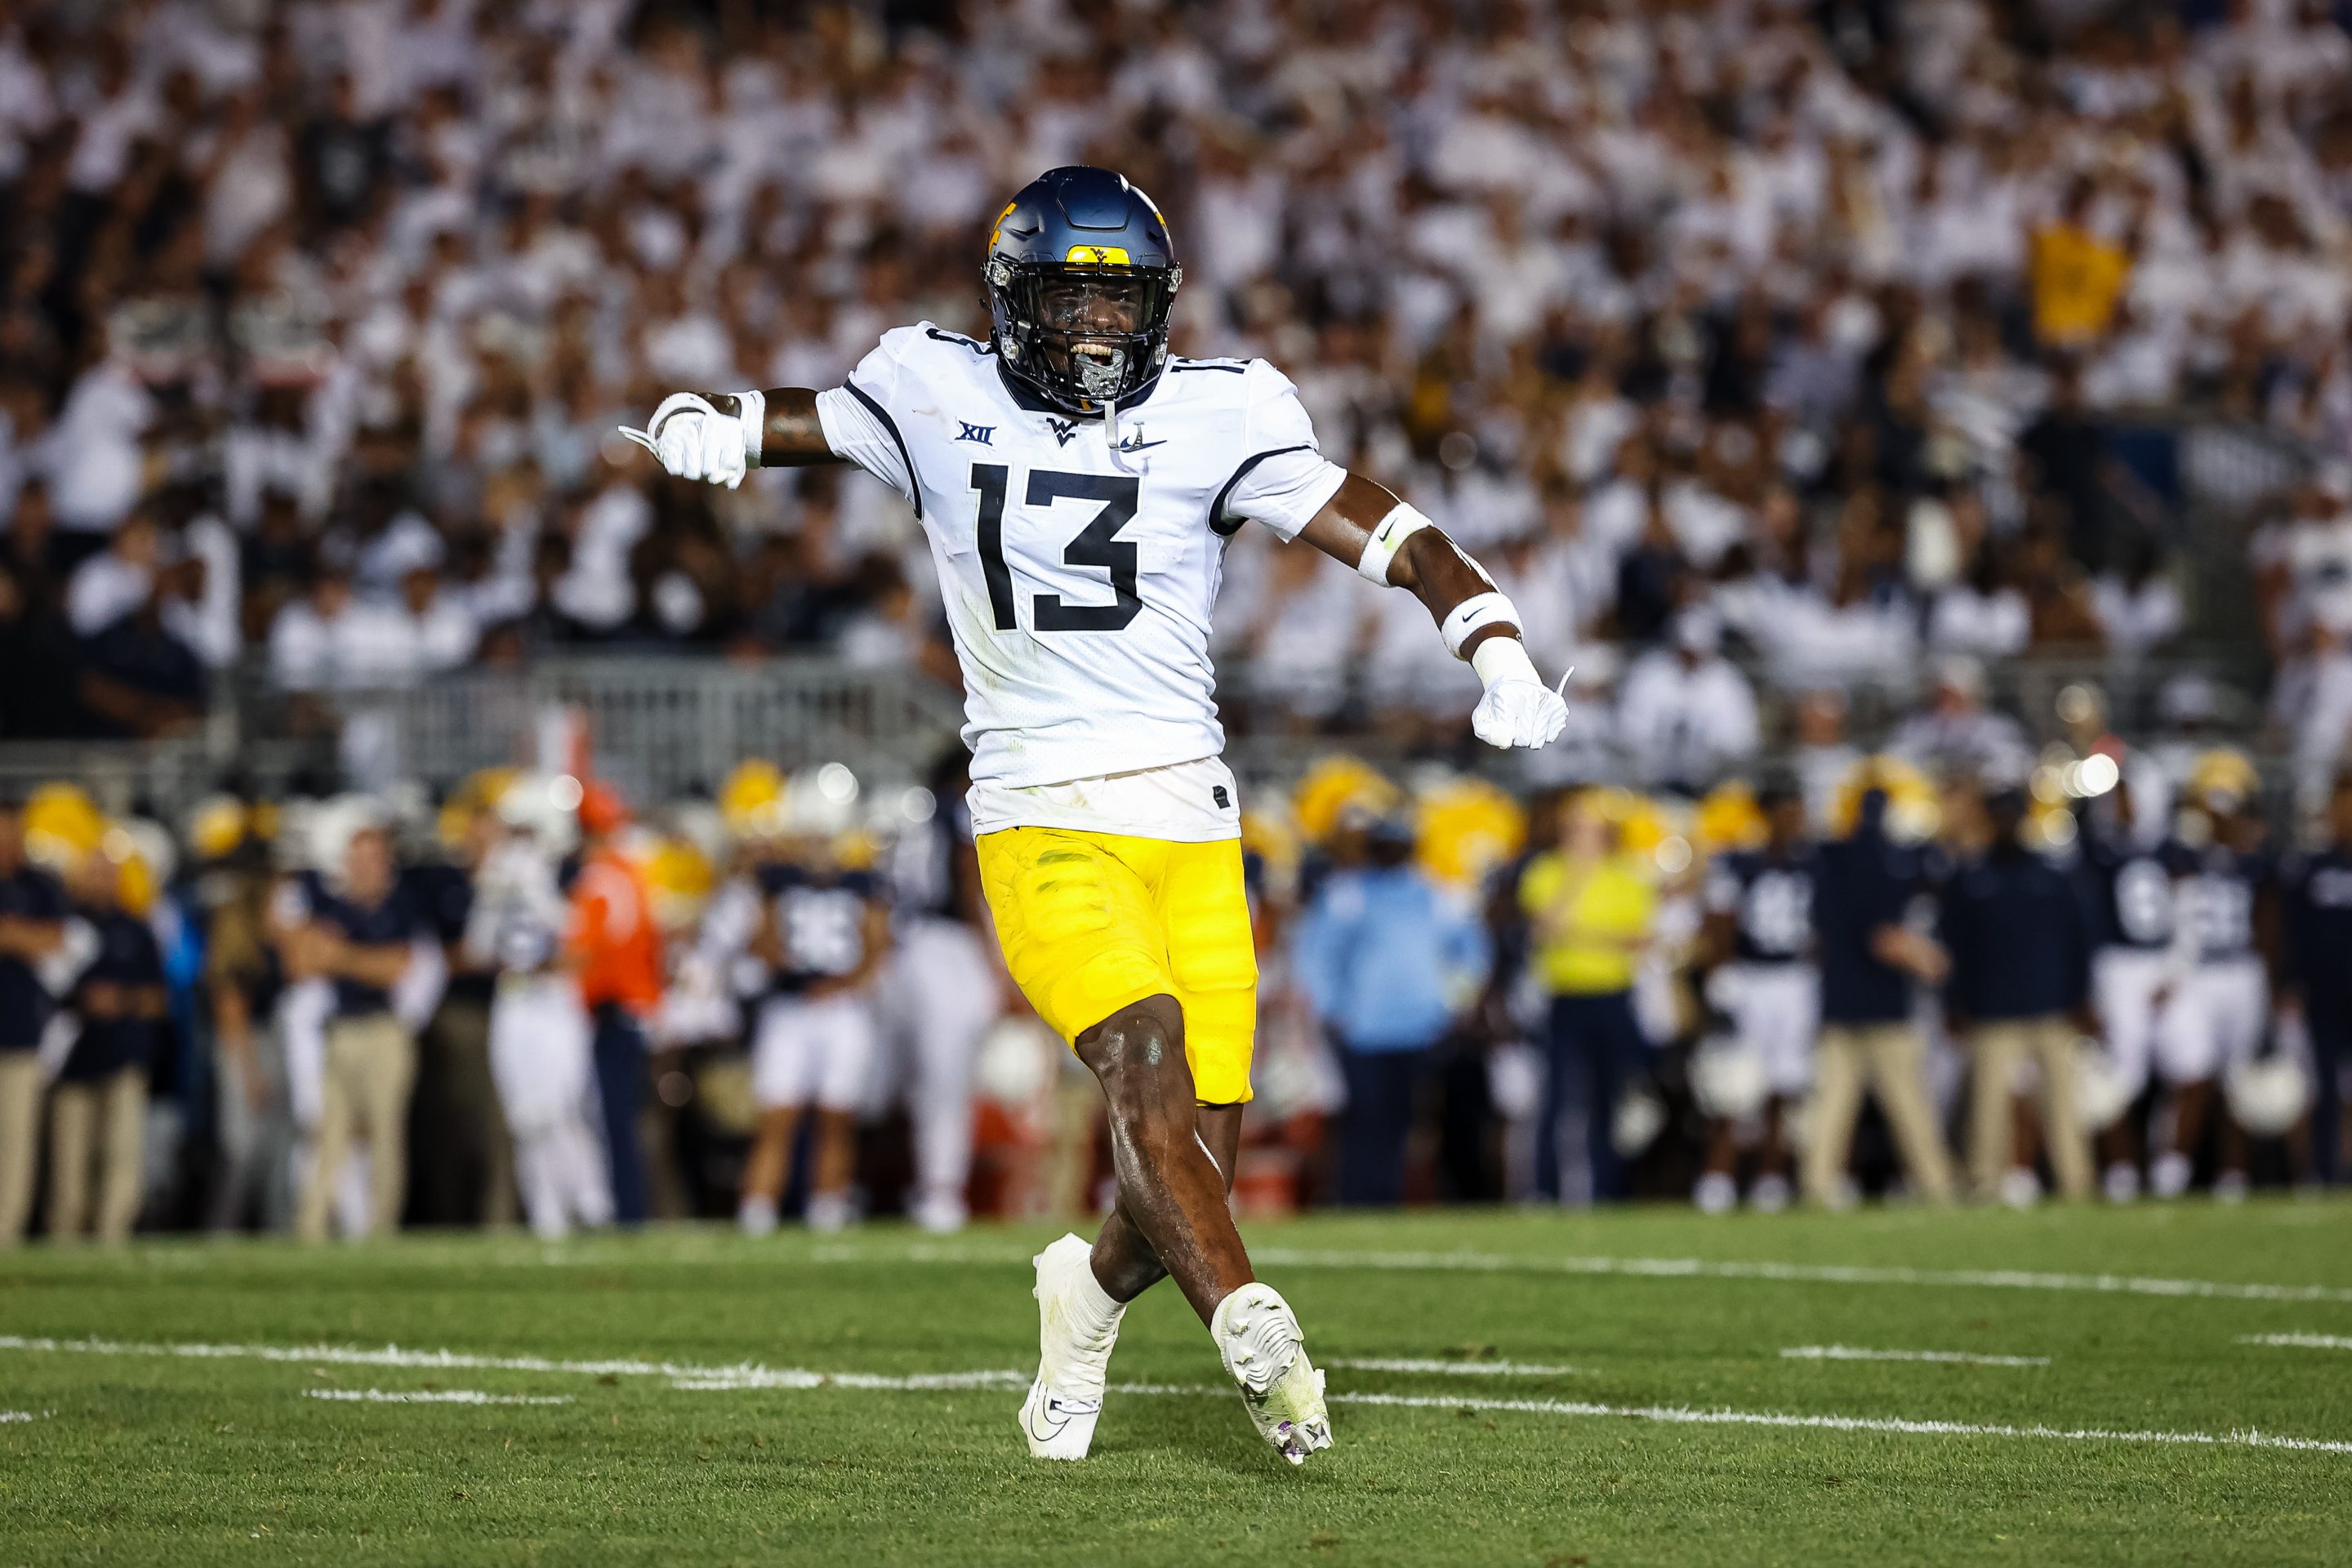 STATE COLLEGaE, PA - SEPTEMBER 02: Hershey McLaurin #13 of the West Virginia Mountaineers celebrates after a play against the Penn State Nittany Lions during the first half at Beaver Stadium on September 2, 2023 in State College, Pennsylvania.